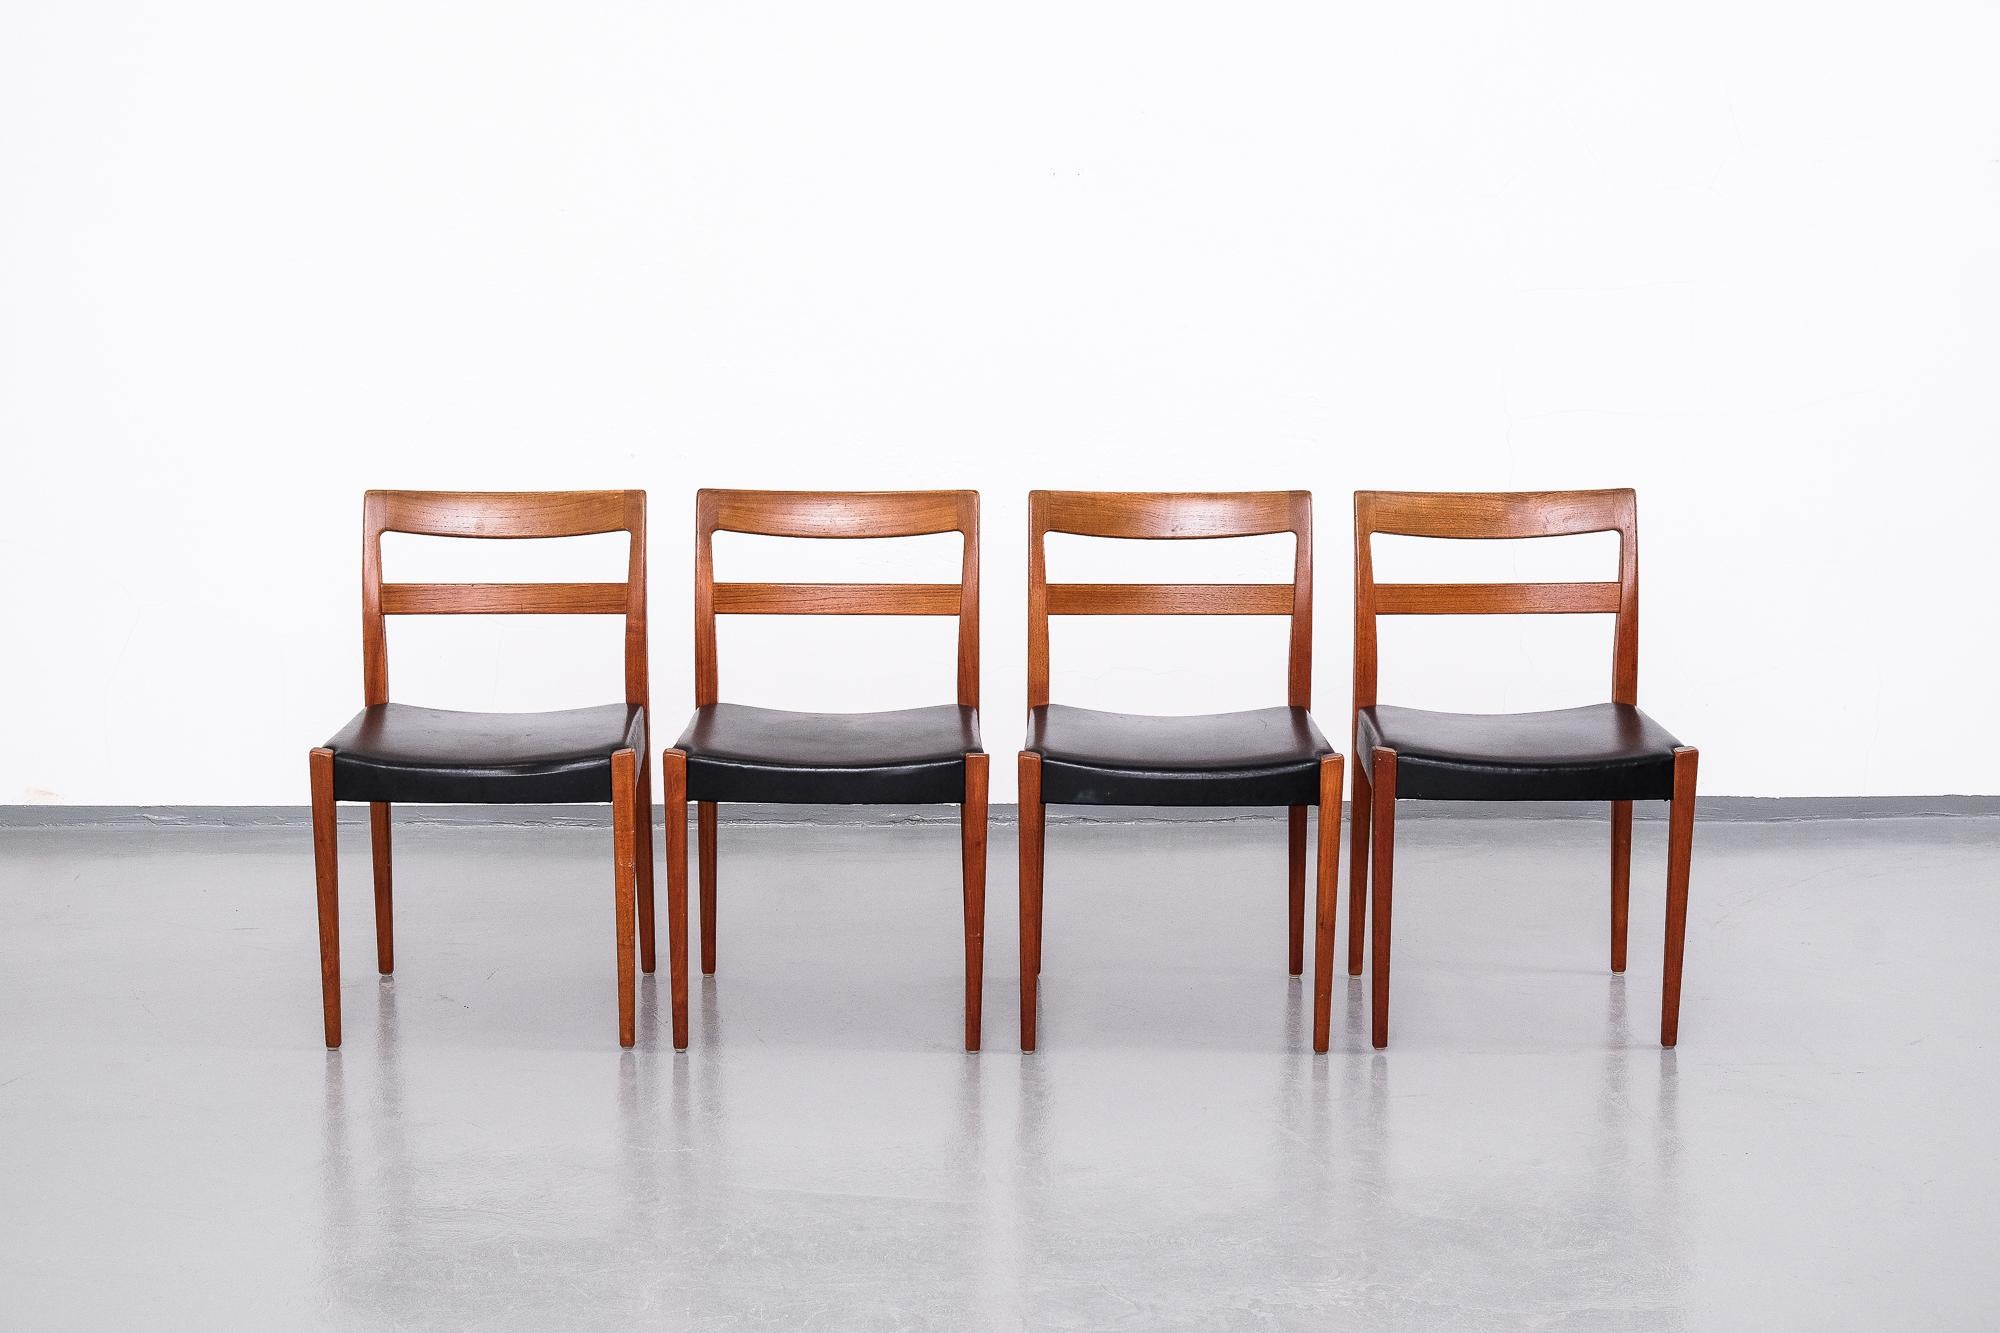 Set of four midcentury teak dining chairs designed by Nils Jonsson for Troeds, Sweden. This model is called Garmi.

Very good vintage condition with signs of usage consistent with age. Original black leatherette upholstery.